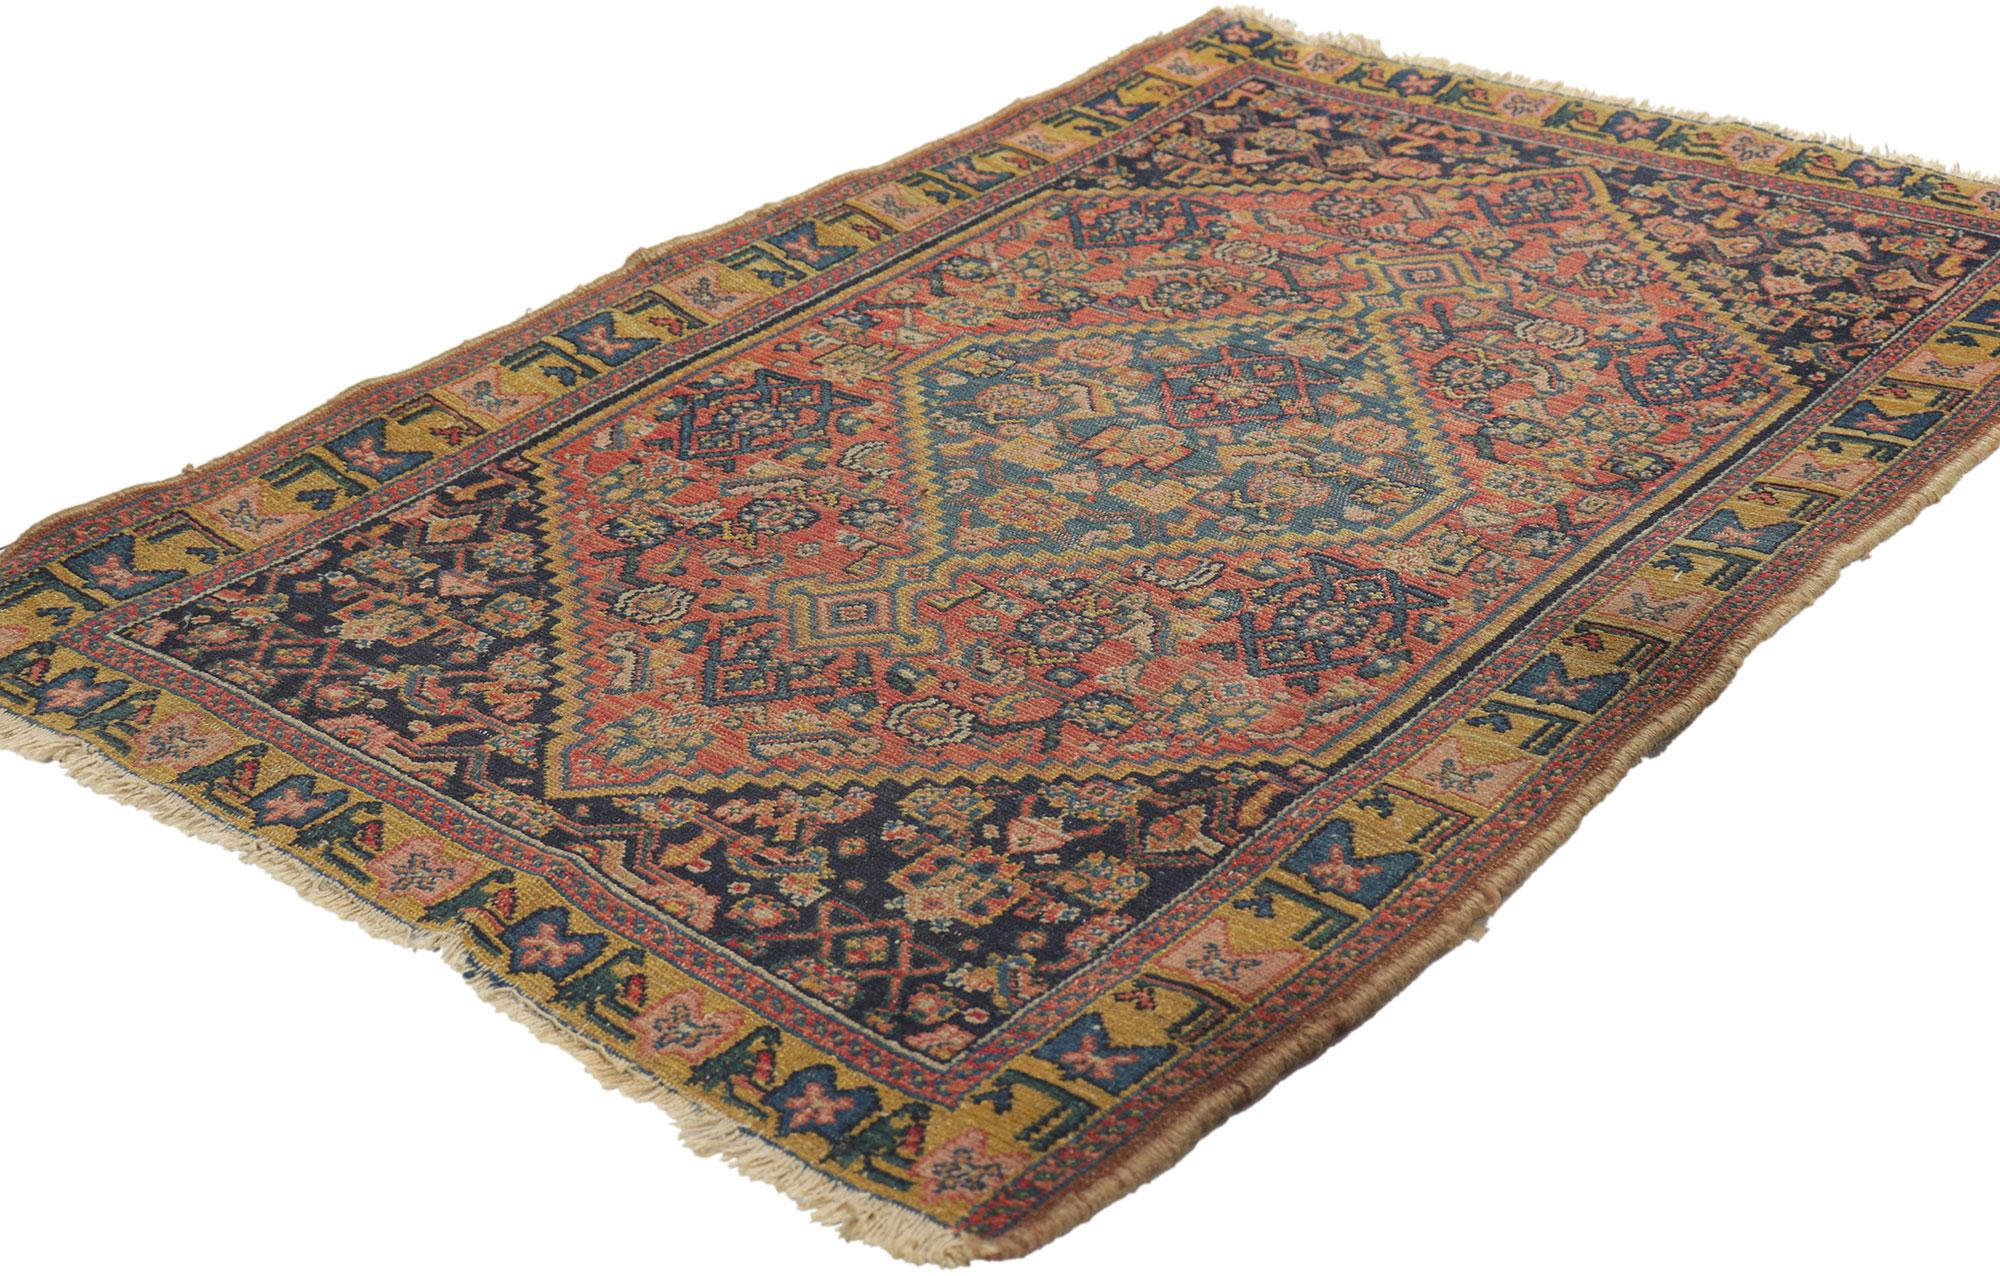 78417 antique Persian Senneh rug, 01'11 x 03'00. With its nomadic charm, incredible detail and texture, this hand-knotted wool antique Persian Senneh rug is a captivating vision of woven beauty. The eye-catching Herati pattern and timeless color